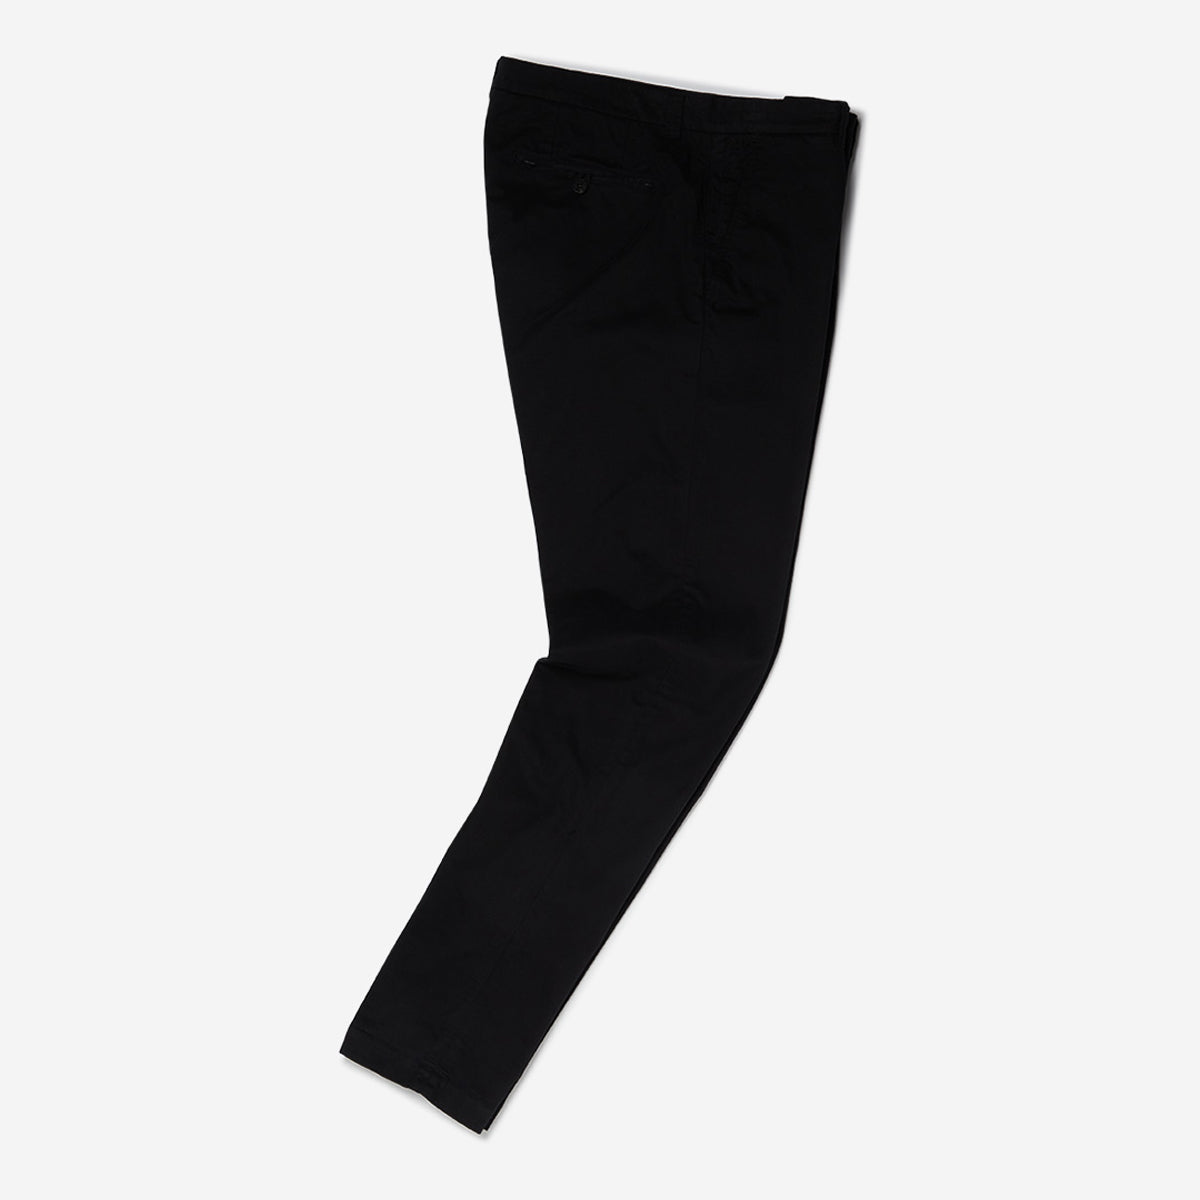 Besterios Black | Cotton Chinos | Men's Trousers | Oliver Sweeney